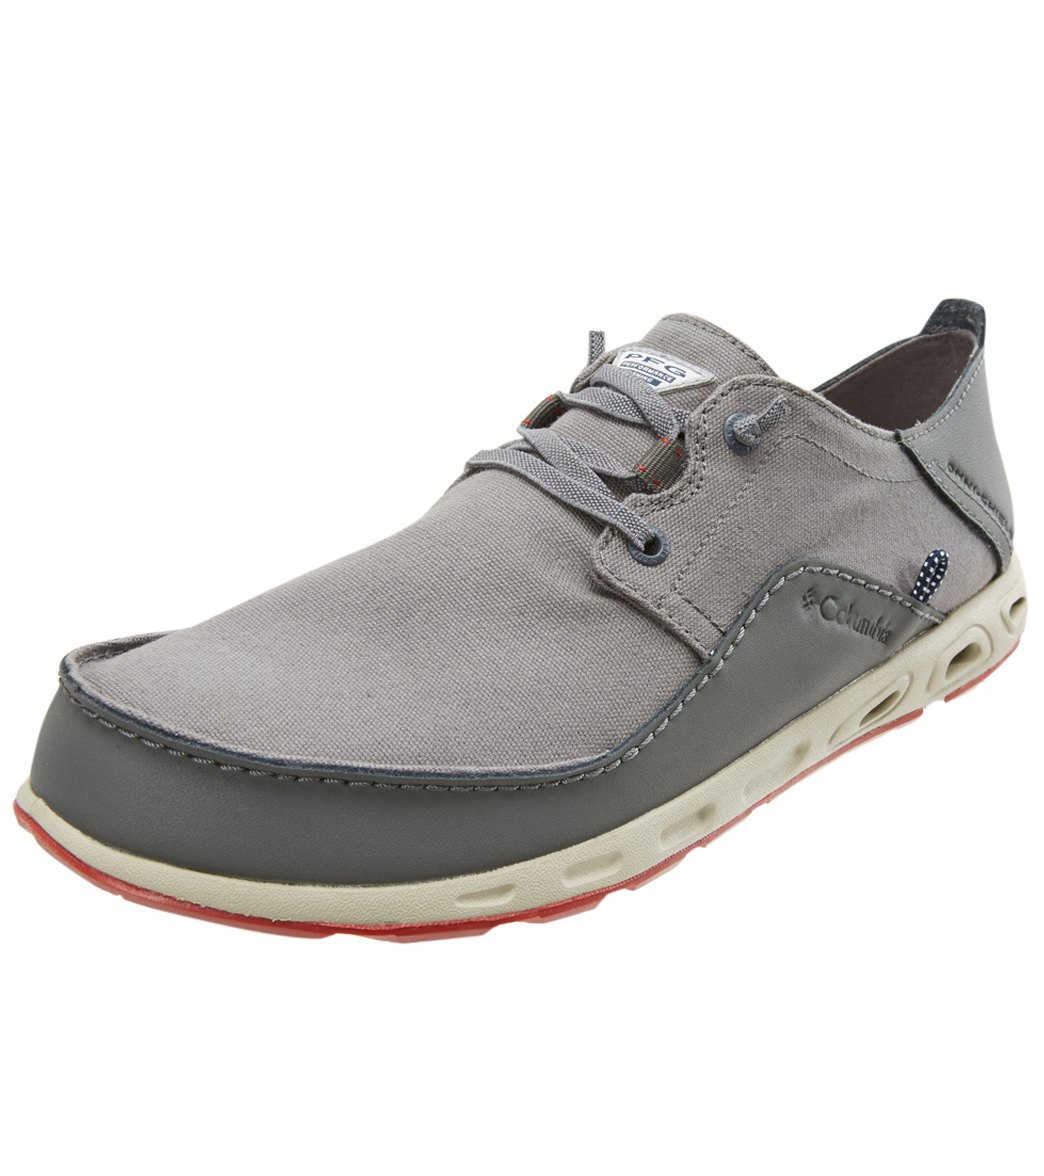 Columbia Men's Bahama™ Vented Relaxed Deck Shoe at SwimOutlet.com ...